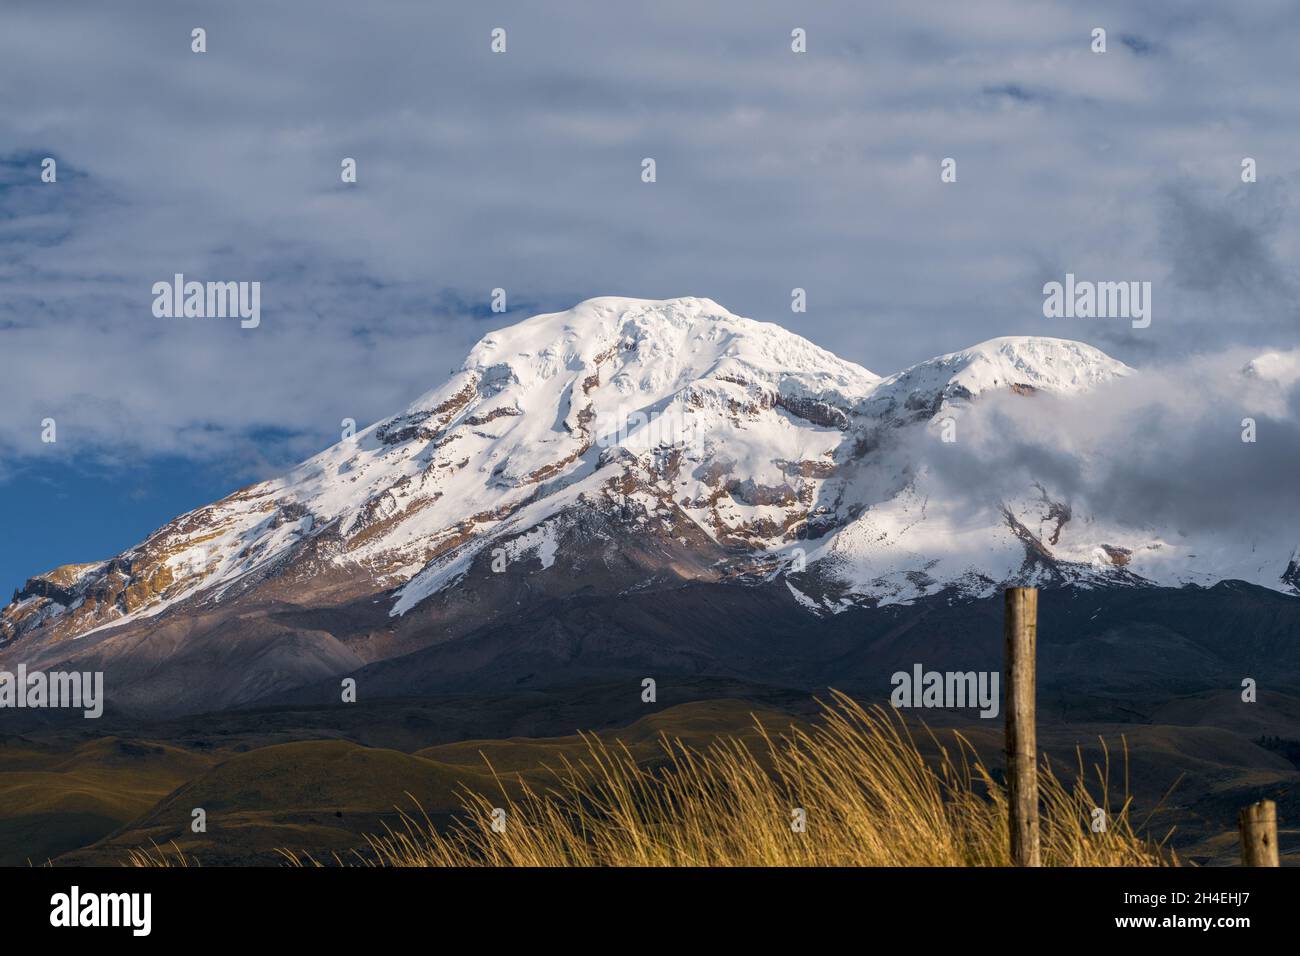 Chimborazo volcano, the most important snow-capped mountain in the Andes in Ecuador, is the closest point to the sun from the center of the earth Stock Photo